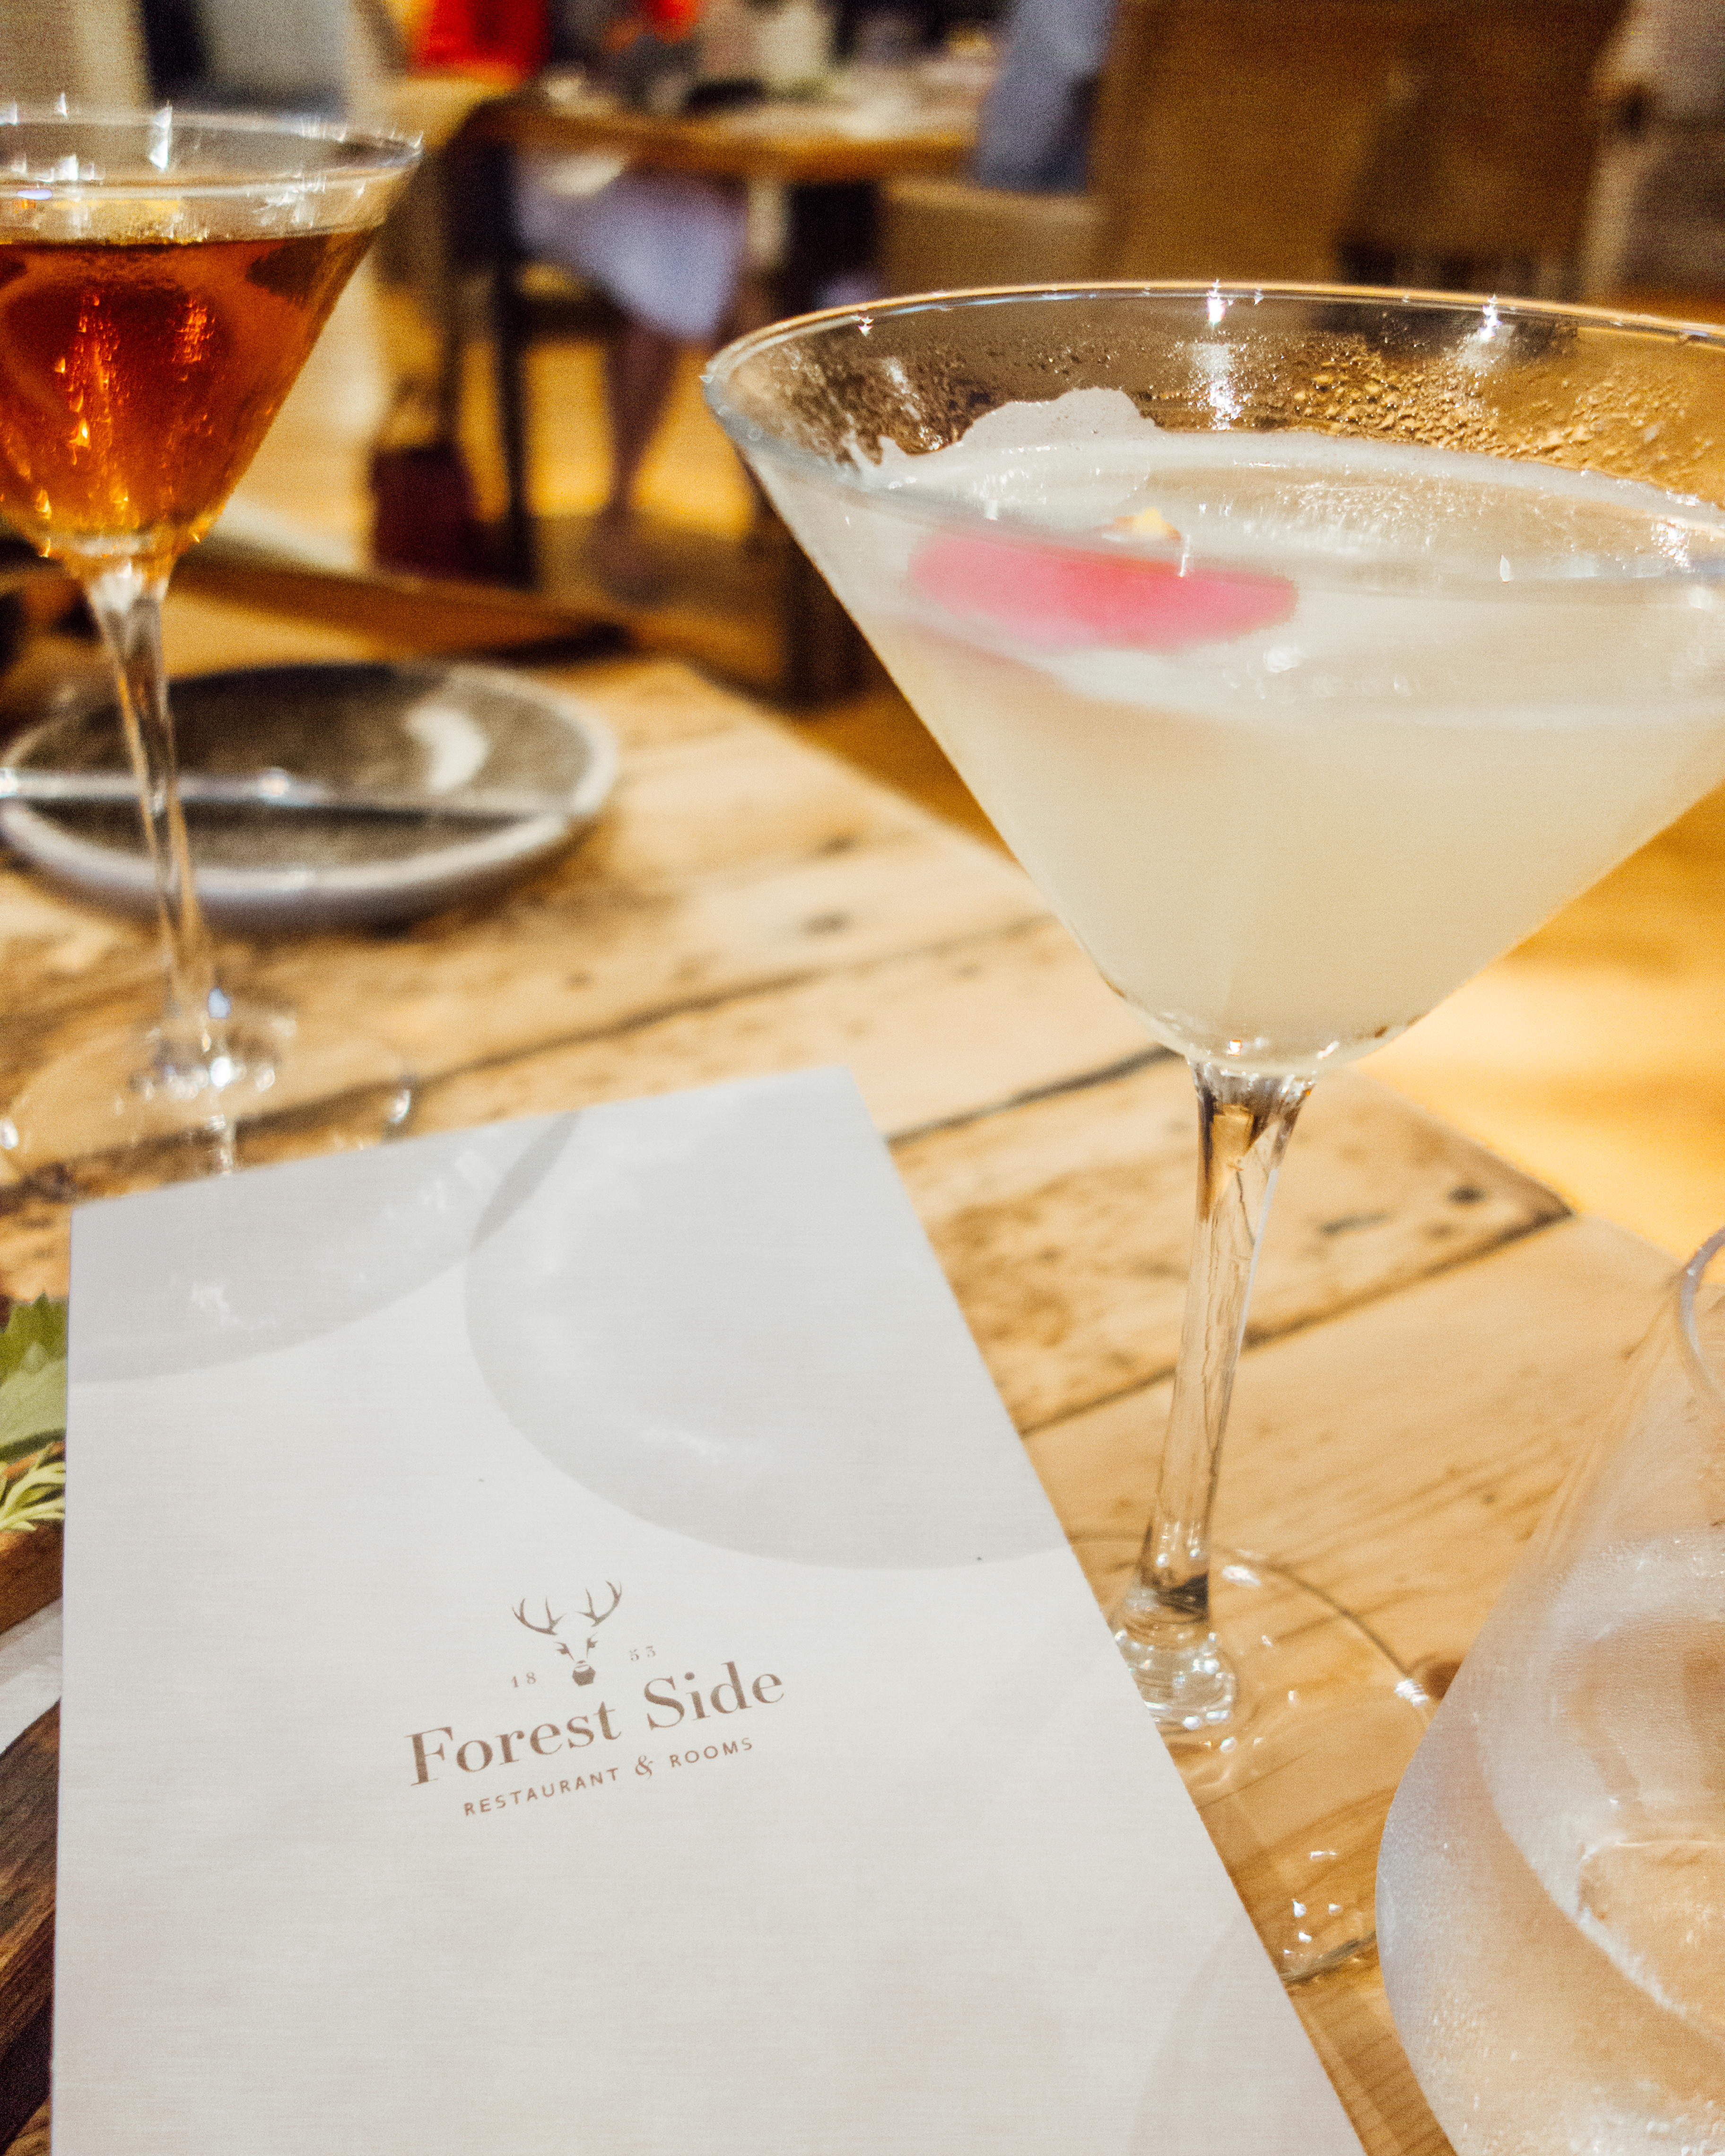 Lychee martini and menu at Forest Side Hotel